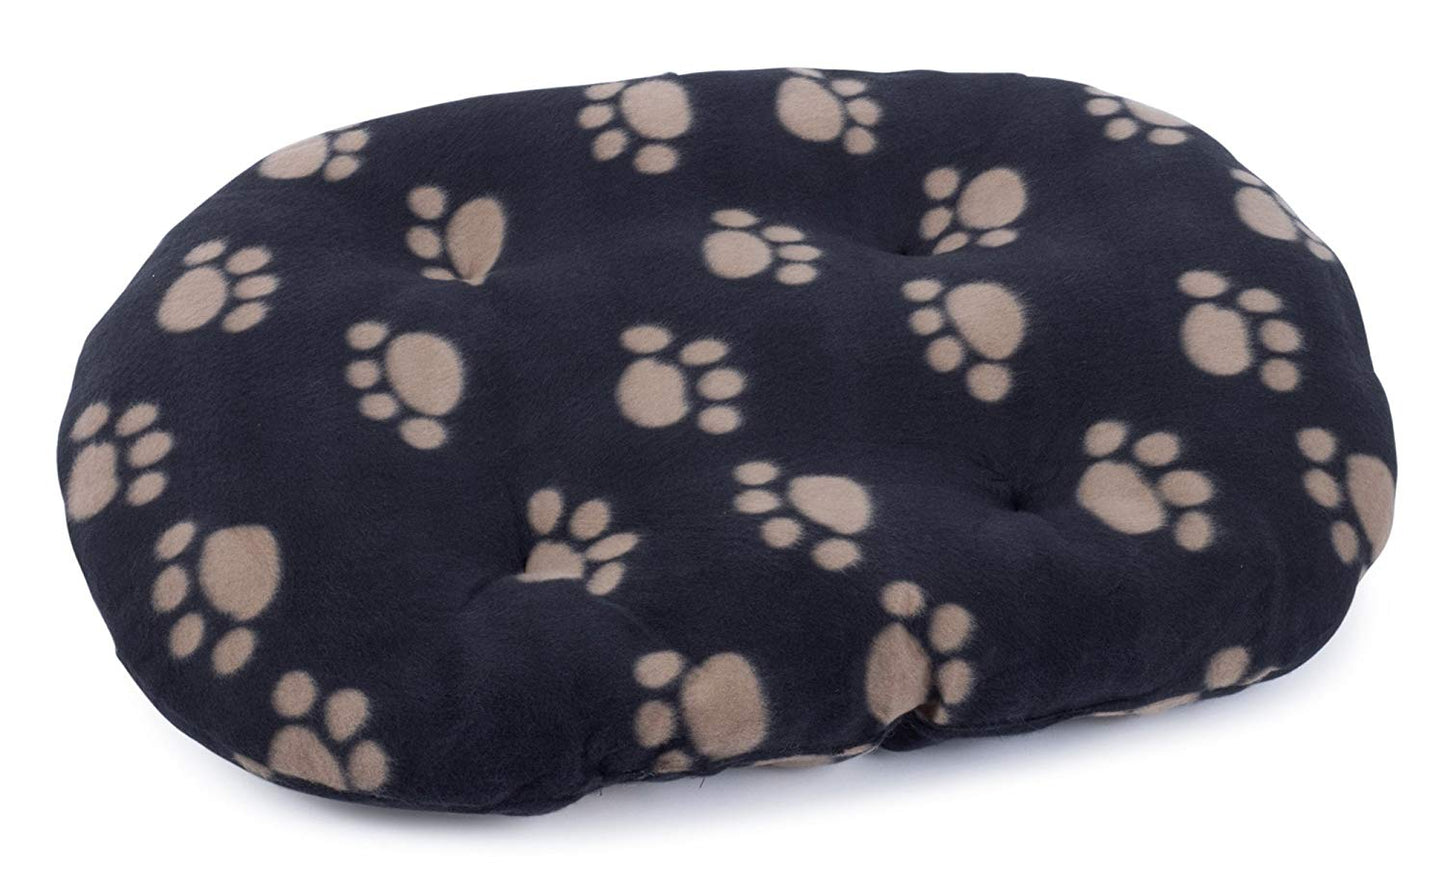 Petface Archies Oval Cushion Black S